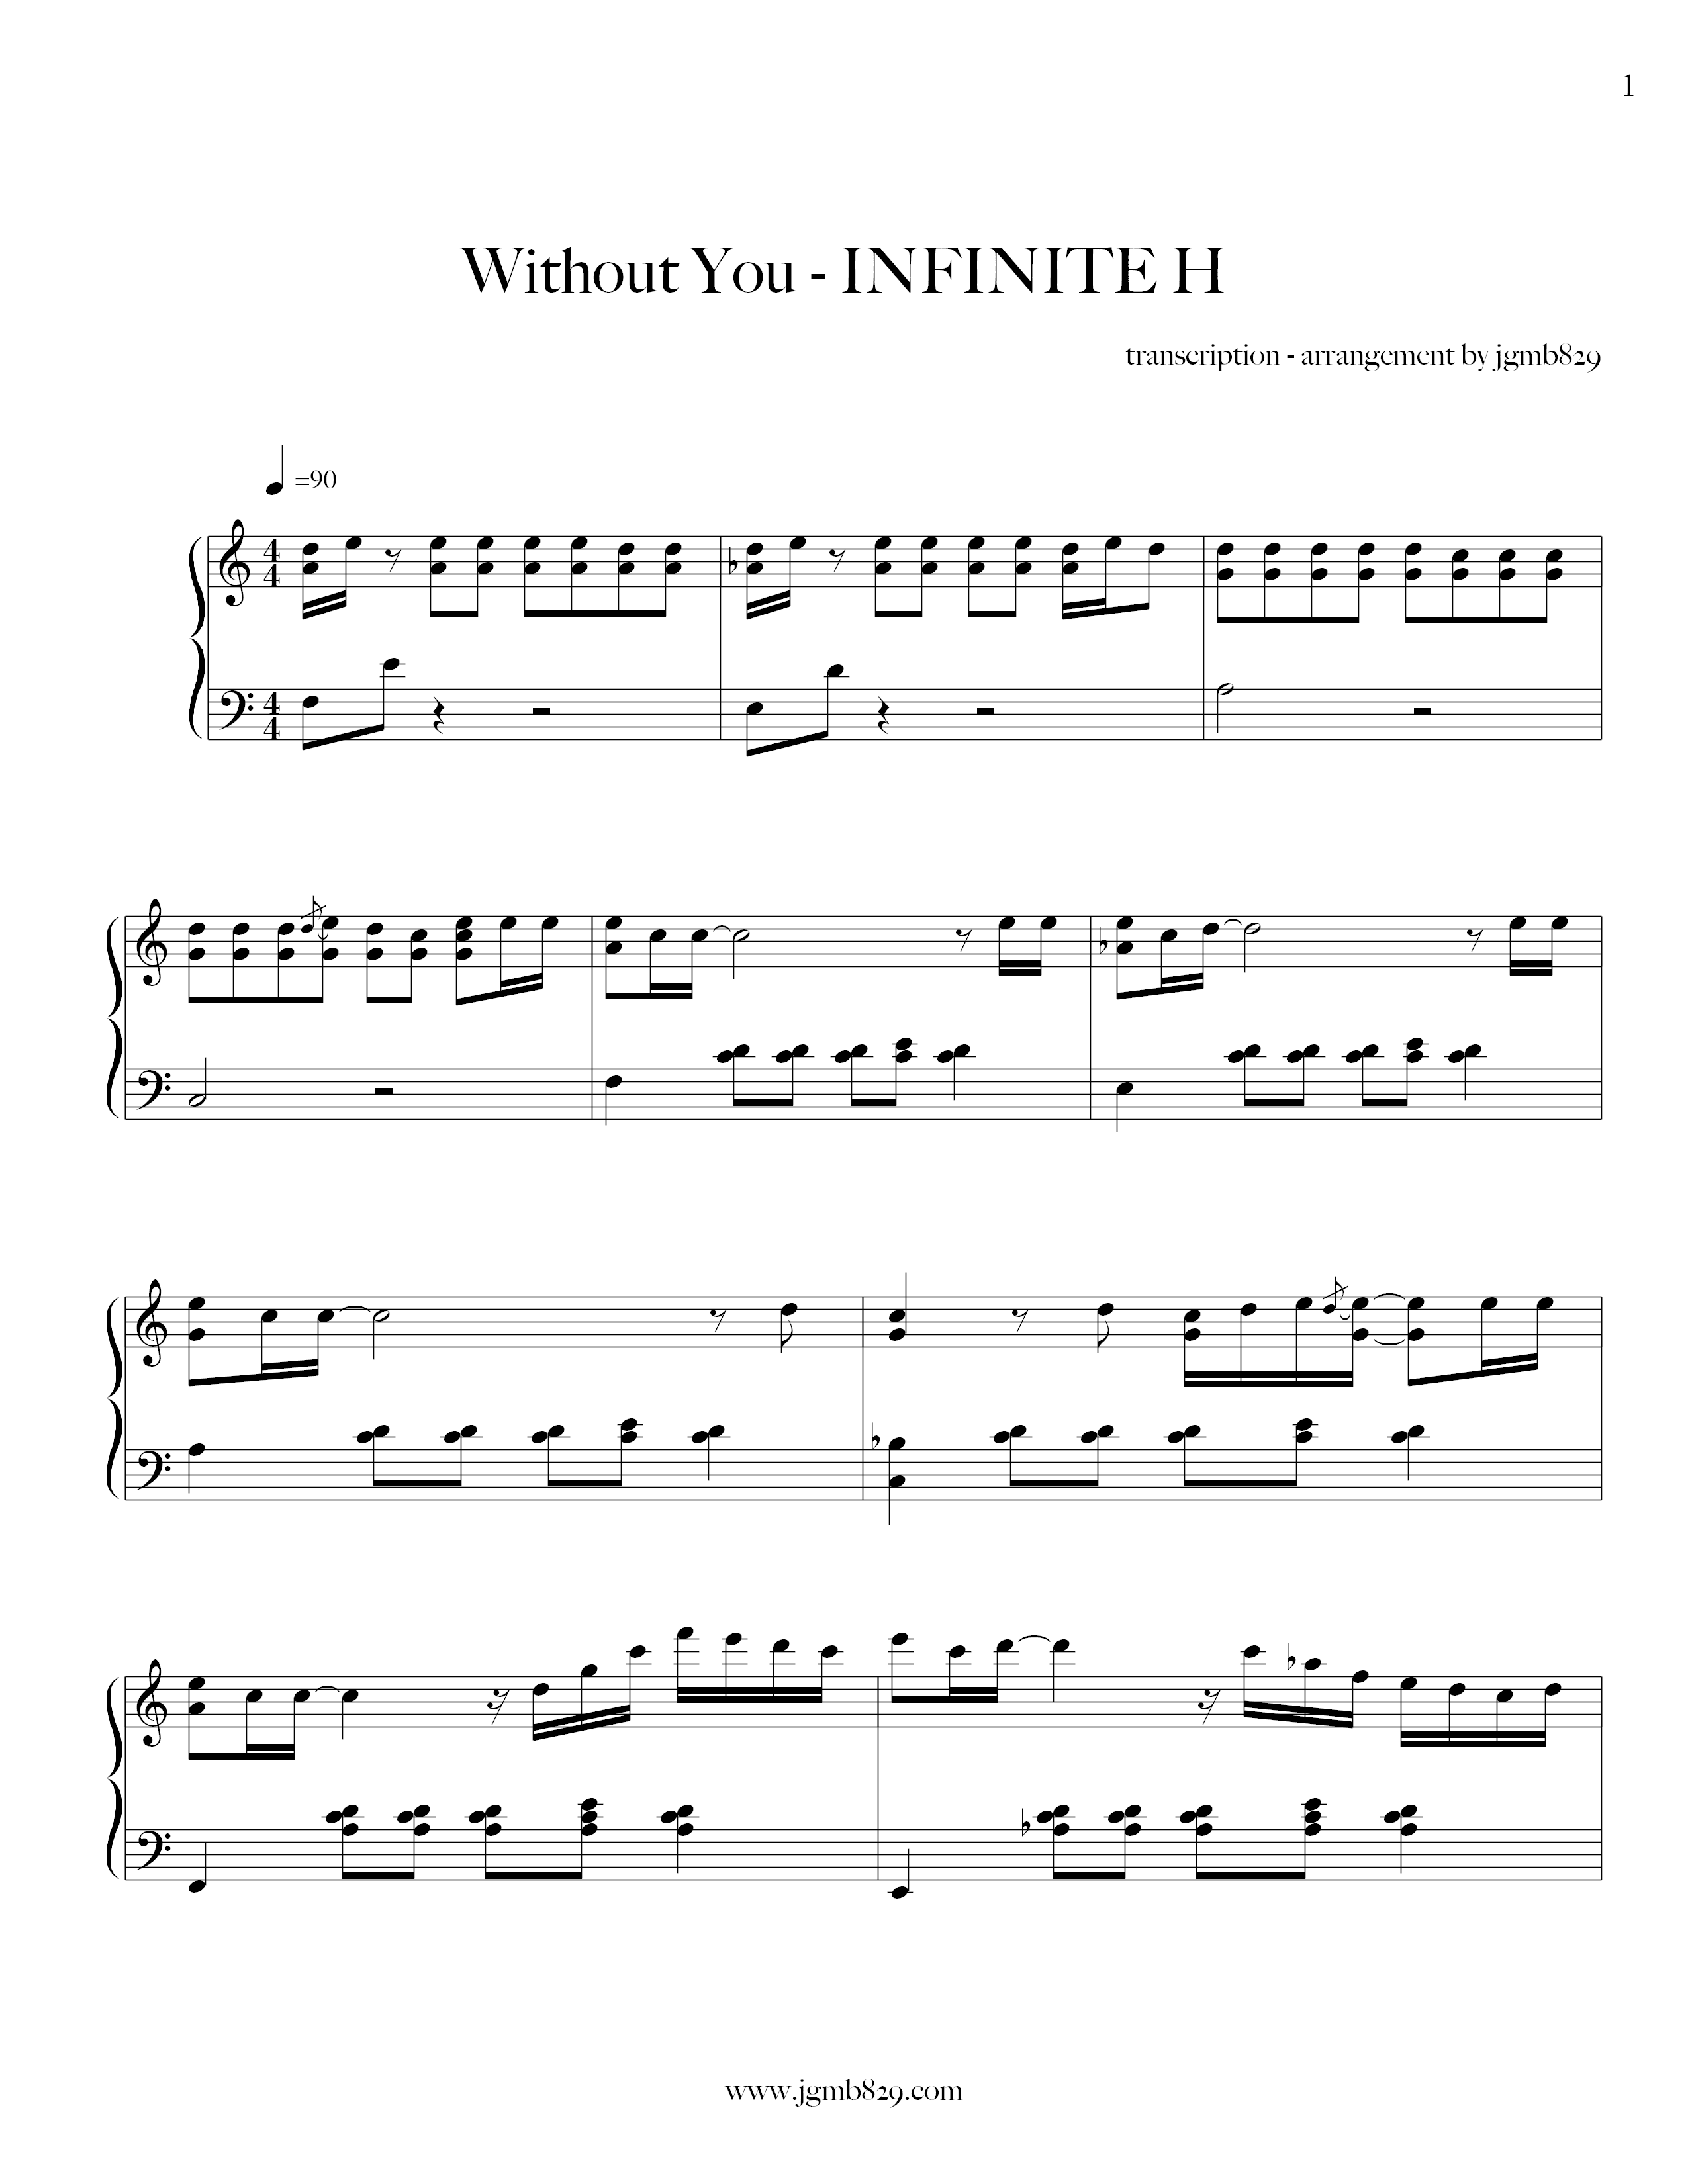 Without You Score